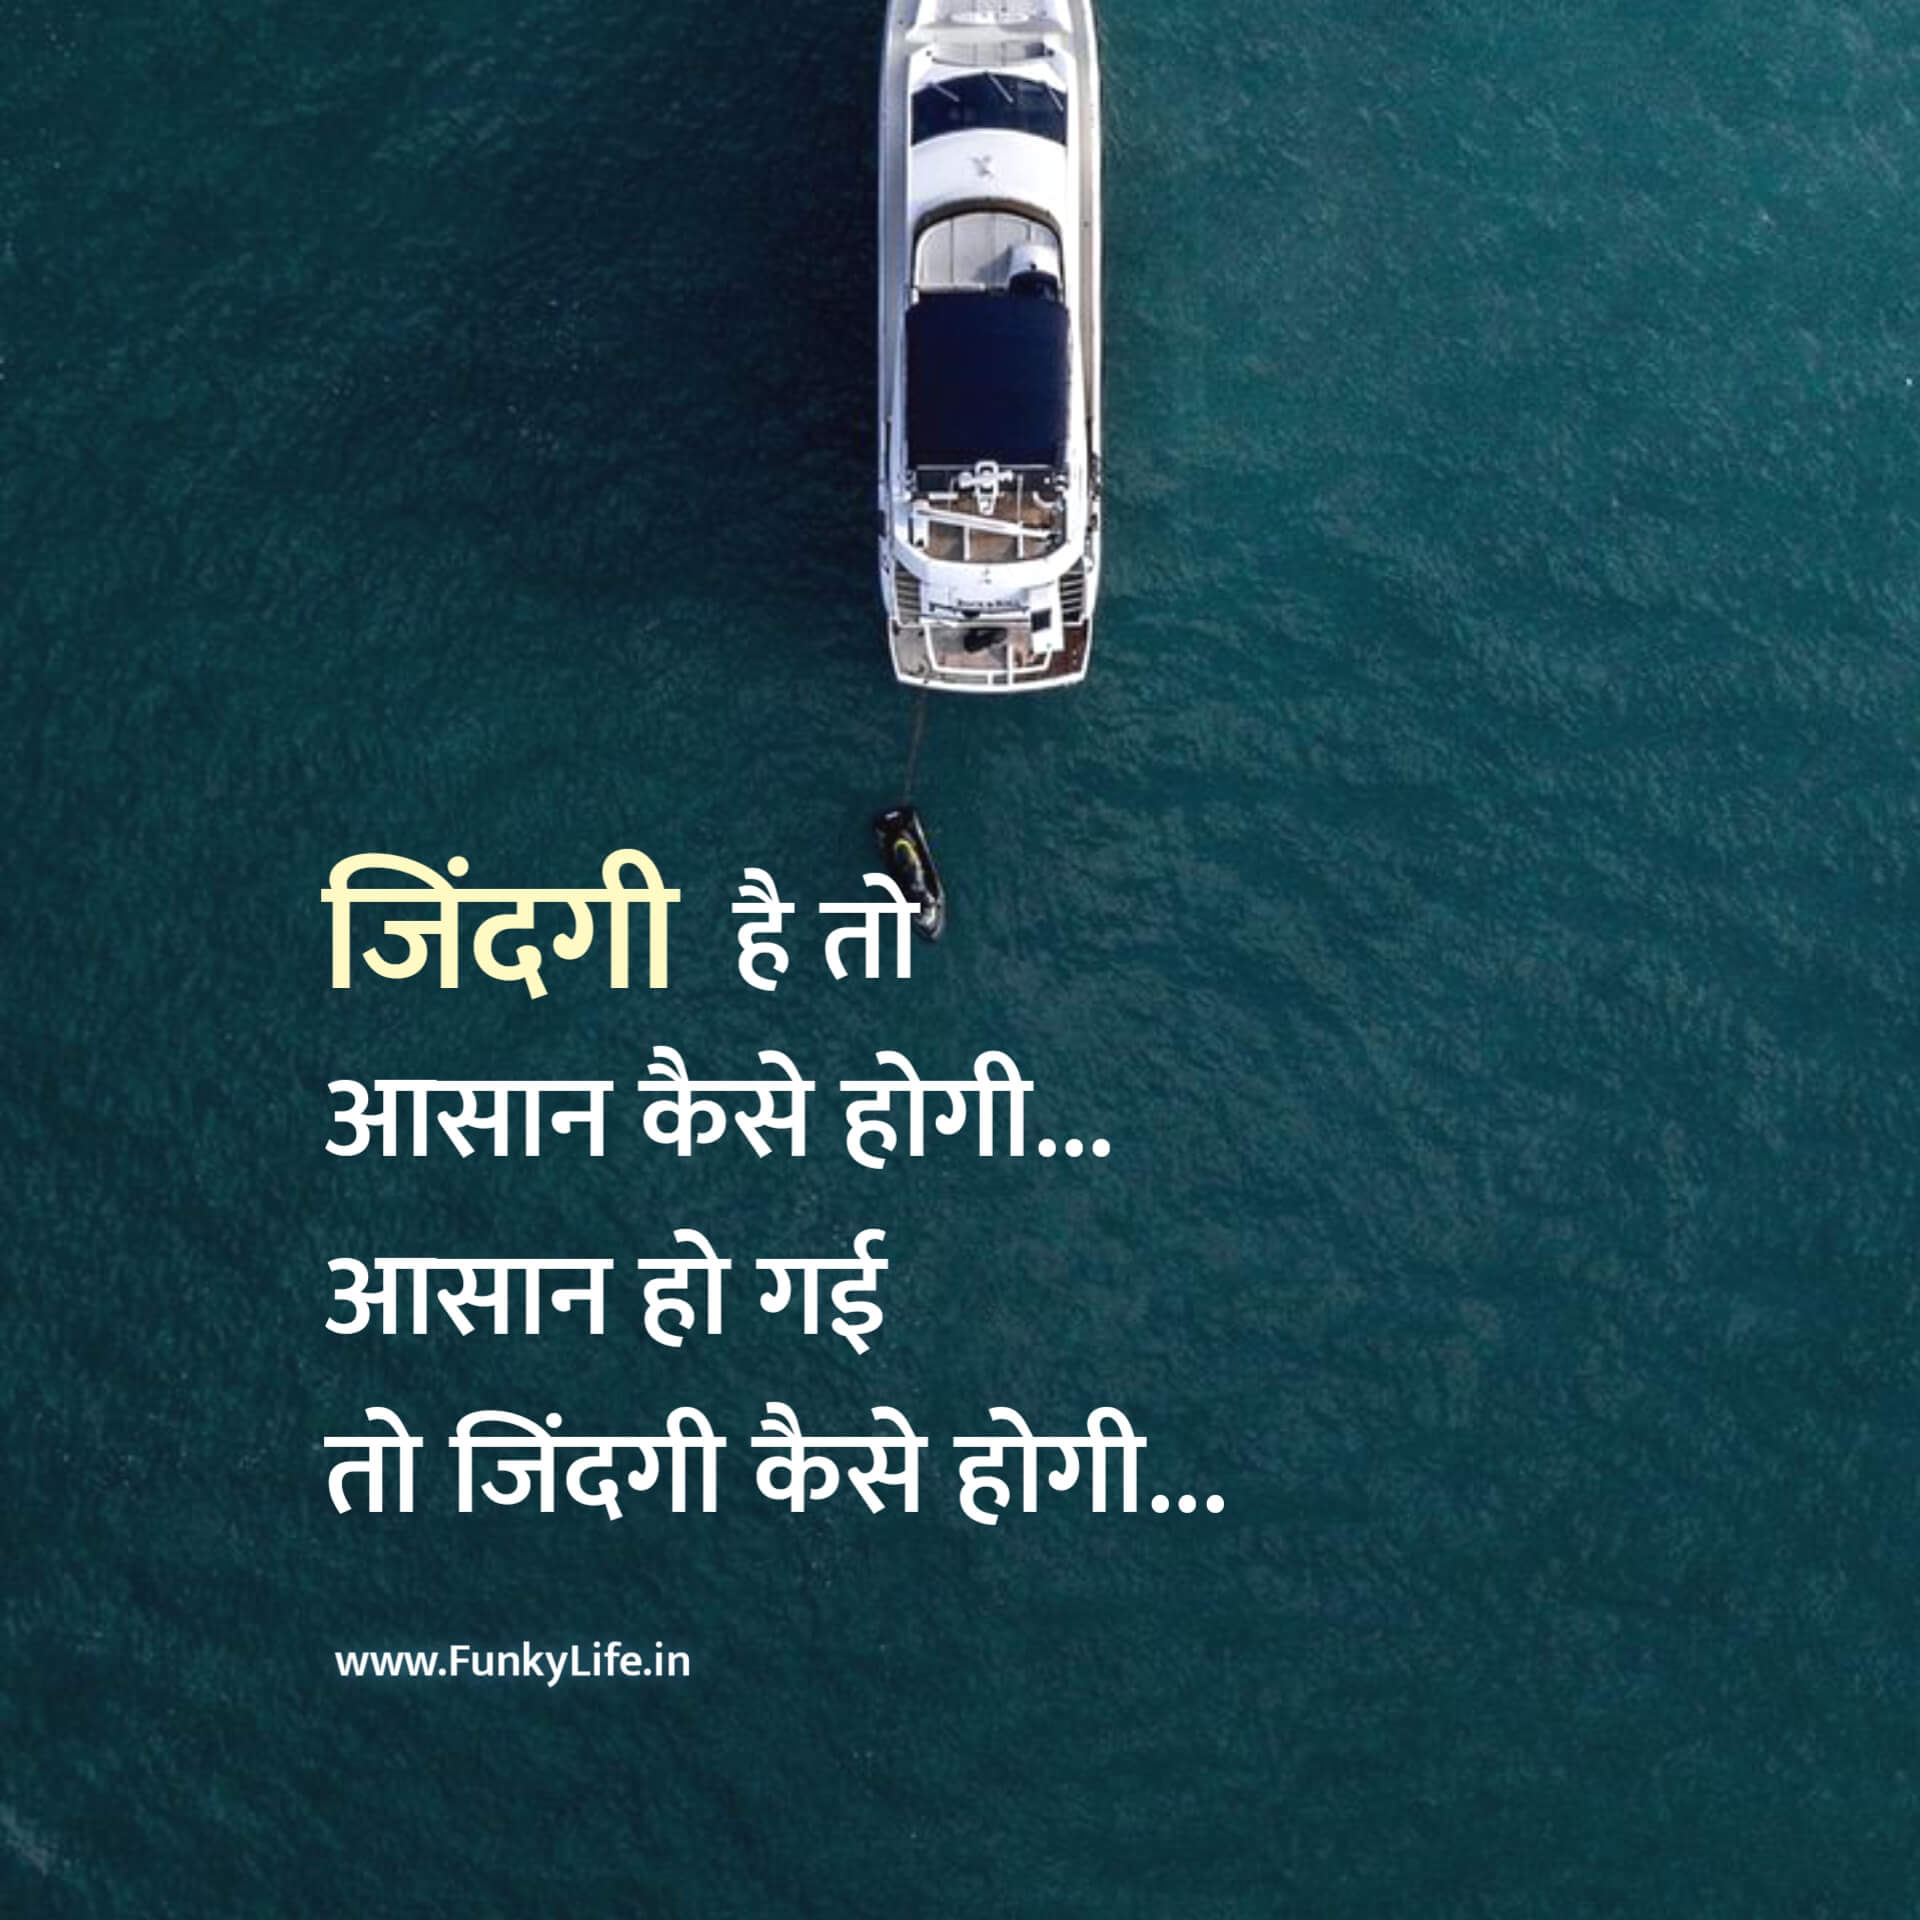 Life Motivational Quote in Hindi